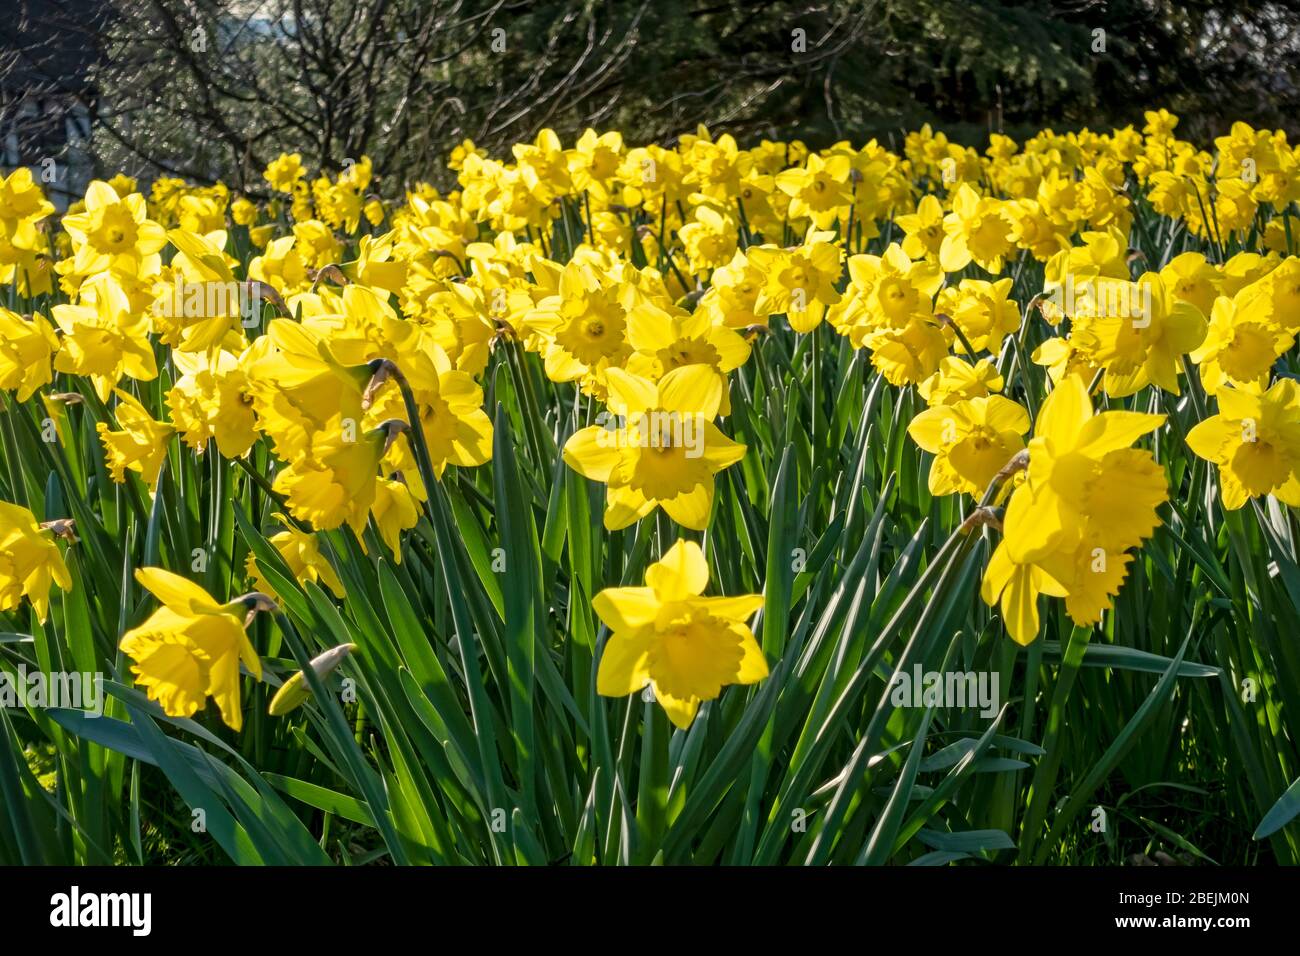 Close up of yellow daffodils flowers flowering in spring England UK United Kingdom GB Great Britain Stock Photo